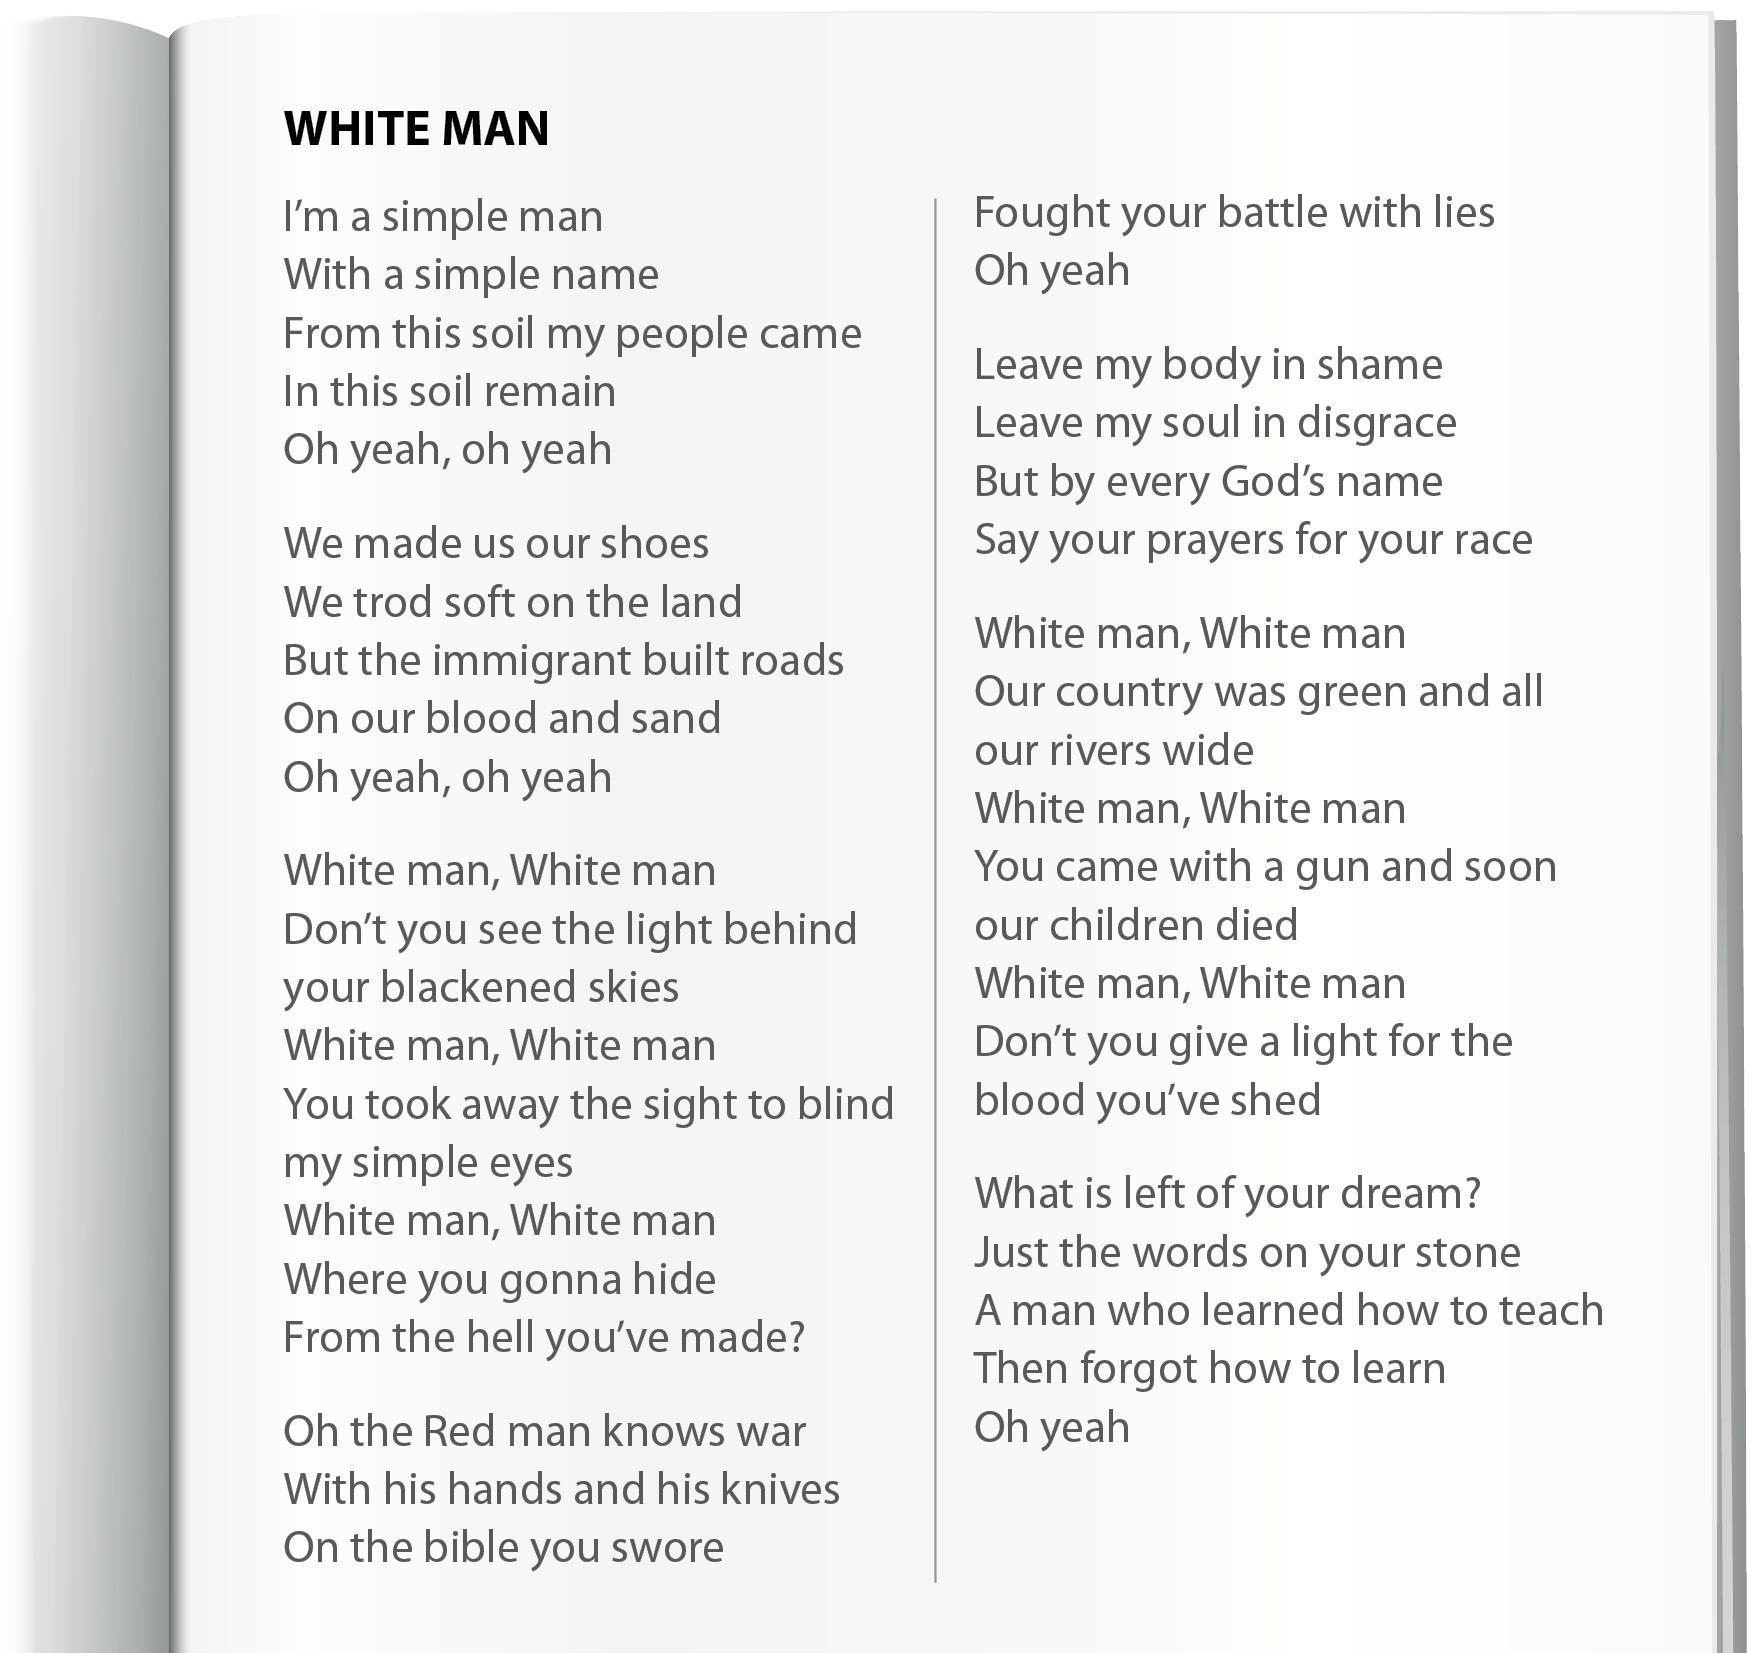 Ilustração. Página de caderno branca, sem pautas. Texto. Letra de música. Título:  WHITE MAN. I’m a simple man, With a simple name, From this soil my people came, In this soil remain, Oh yeah, oh yeah, We made us our shoes, We trod soft on the land, But the immigrant built roads, On our blood and sand, Oh yeah, oh yeah, White man, White man, Don’t you see the light behind, your blackened skies, White man, White man, You took away the sight to blind, my simple eyes, White man, White man, Where you gonna hide, From the hell you’ve made?, Oh the Red man knows war, With his hands and his knives, On the bible you swore, Fought your battle with lies, Oh yeah, Leave my body in shame, Leave my soul in disgrace, But by every God’s name, Say your prayers for your race, White man, White man, Our country was green and all, our rivers wide, White man, White man, You came with a gun and soon, our children died, White man, White man, Don’t you give a light for the, blood you’ve shed, What is left of your dream?, Just the words on your stone, A man who learned how to teach, Then forgot how to learn, Oh yeah.